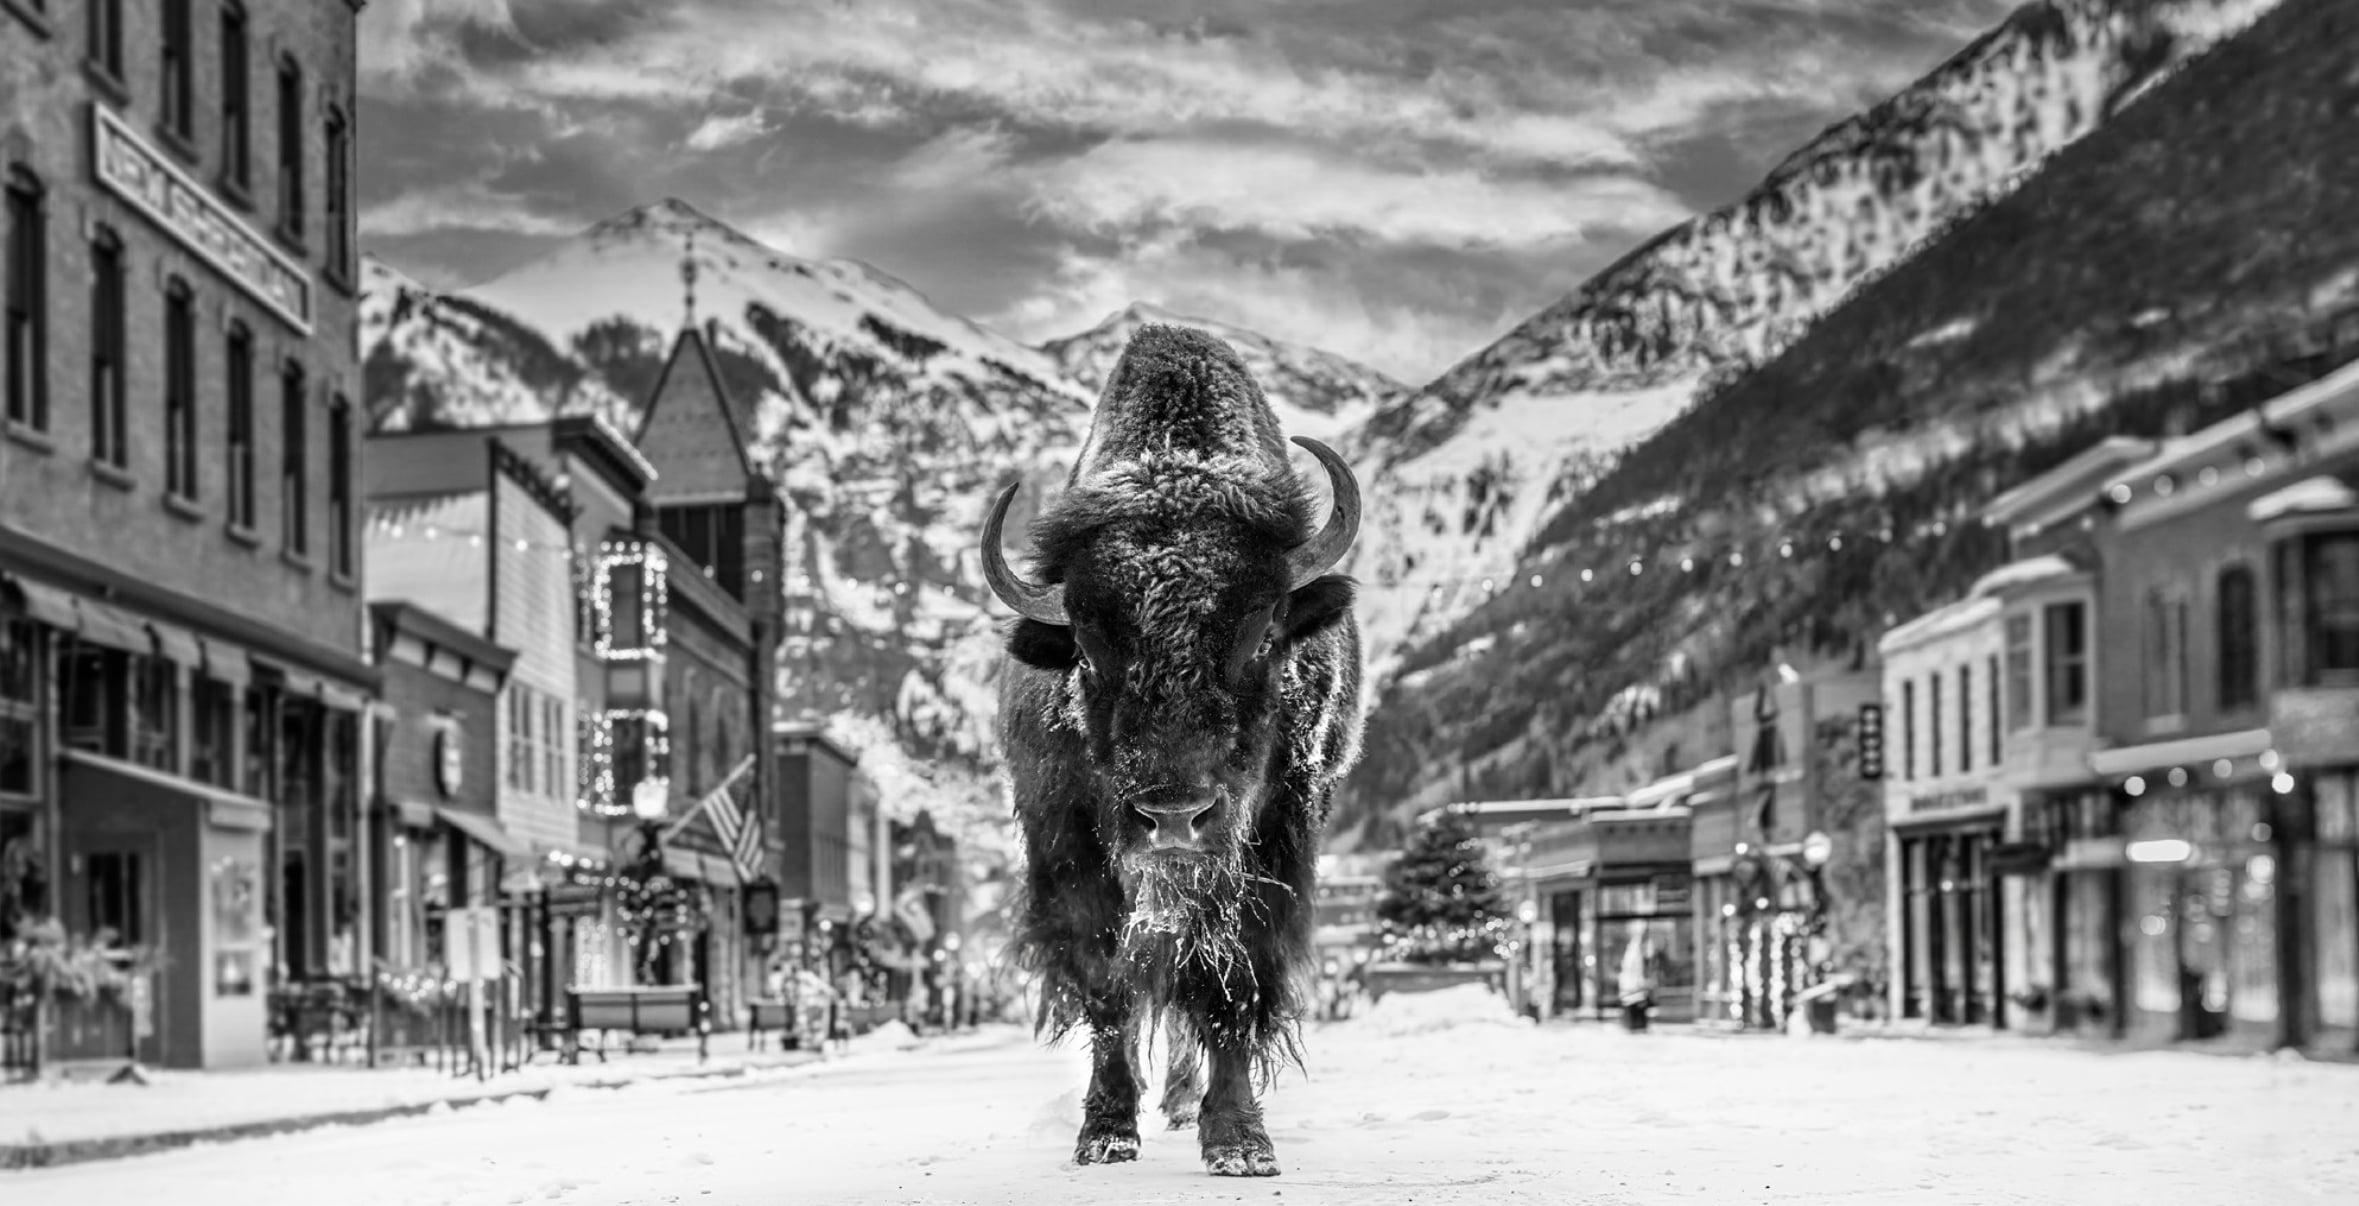 David Yarrow Black and White Photograph - 'The Bison on Main' - Bison on a snowy village road, fine art photography, 2023